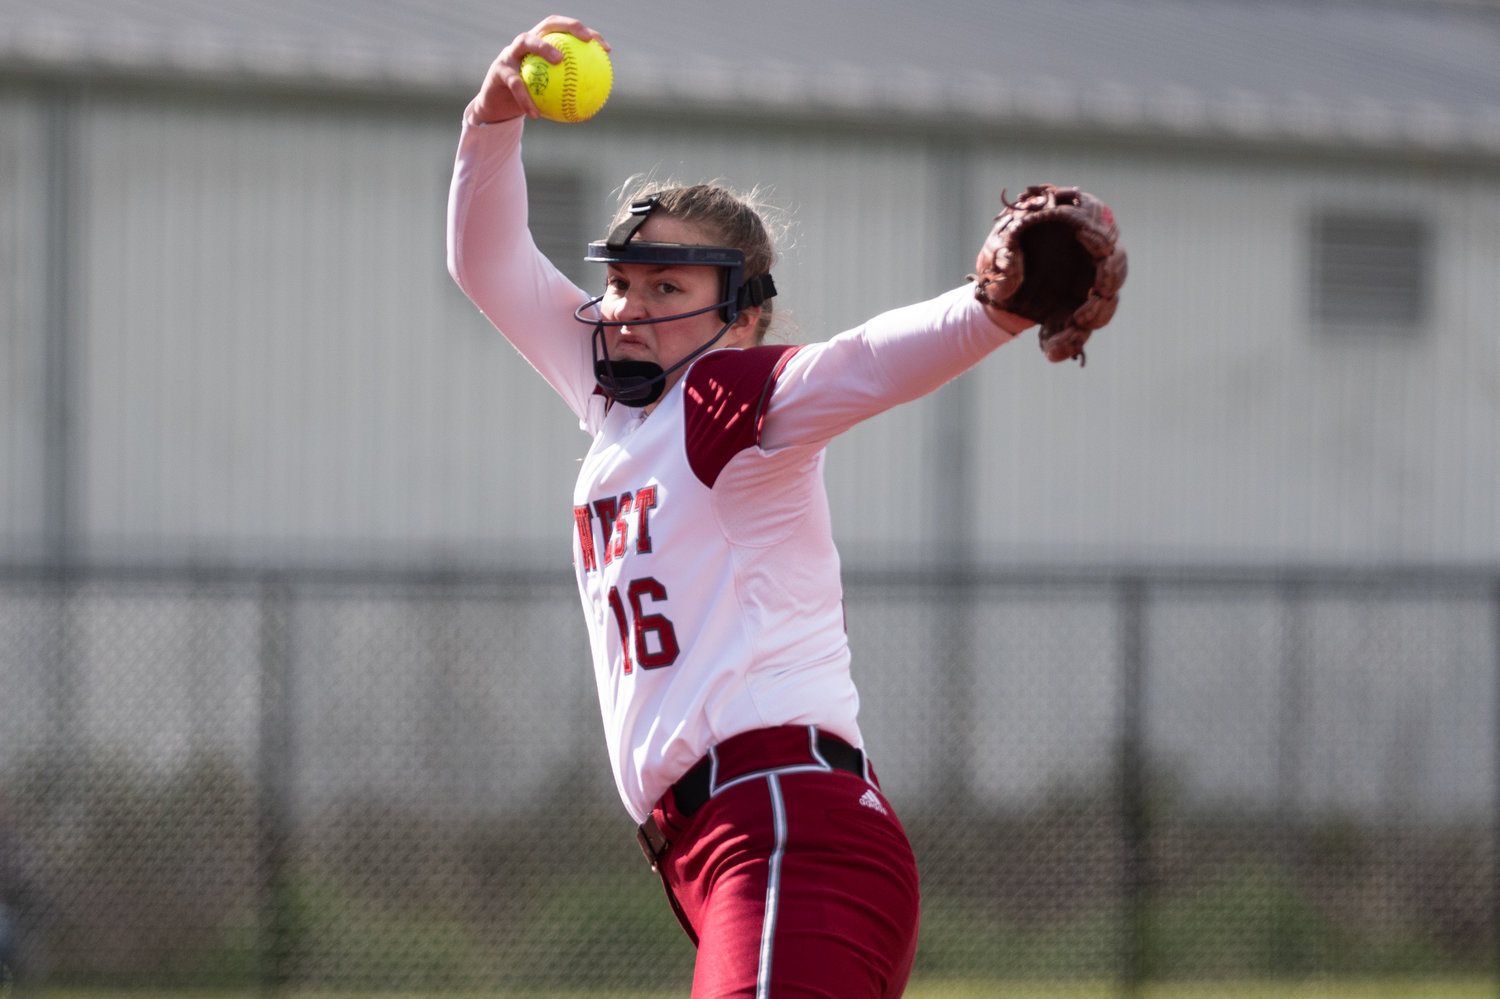 W.F. West's Kamy Dacus pitches against W.F. West at Recreation Park in Chehalis April 15.